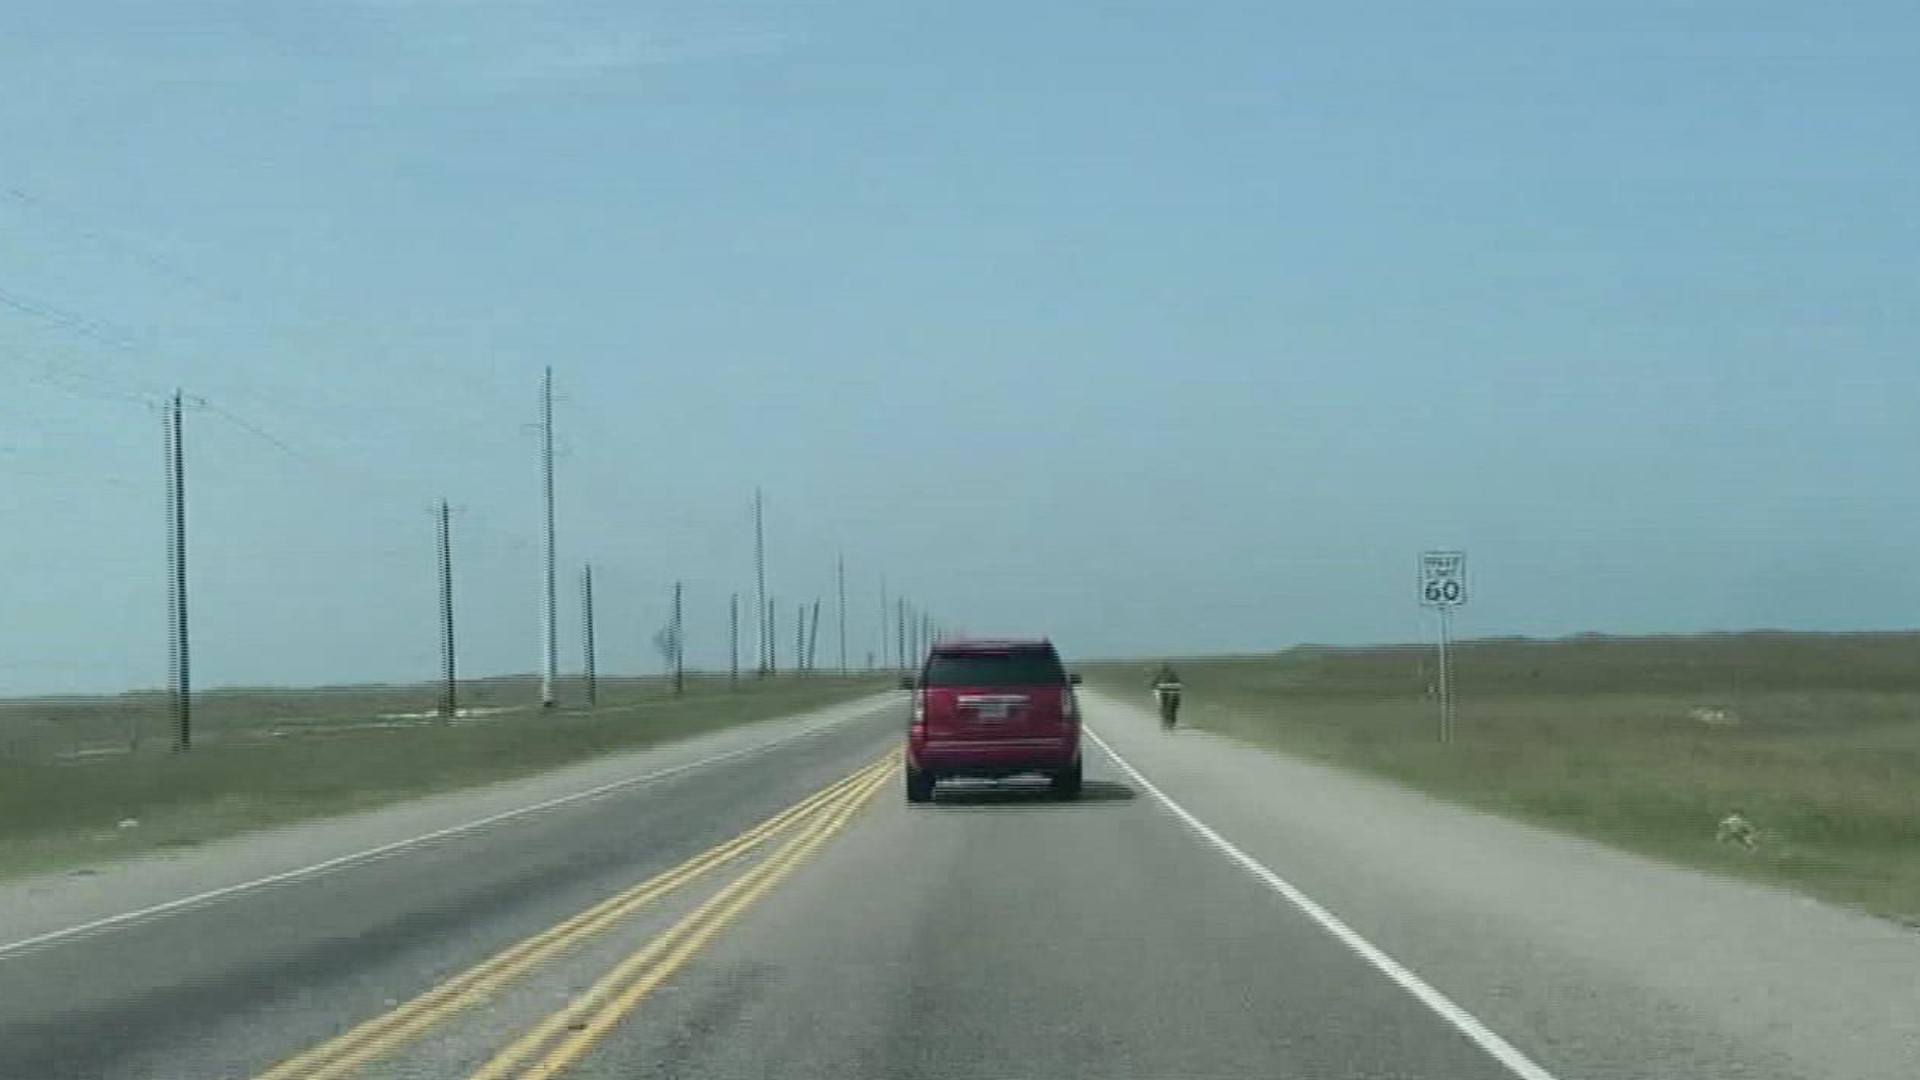 One person was killed and another was seriously injured in a head-on crash early Thursday morning near Port Aransas.